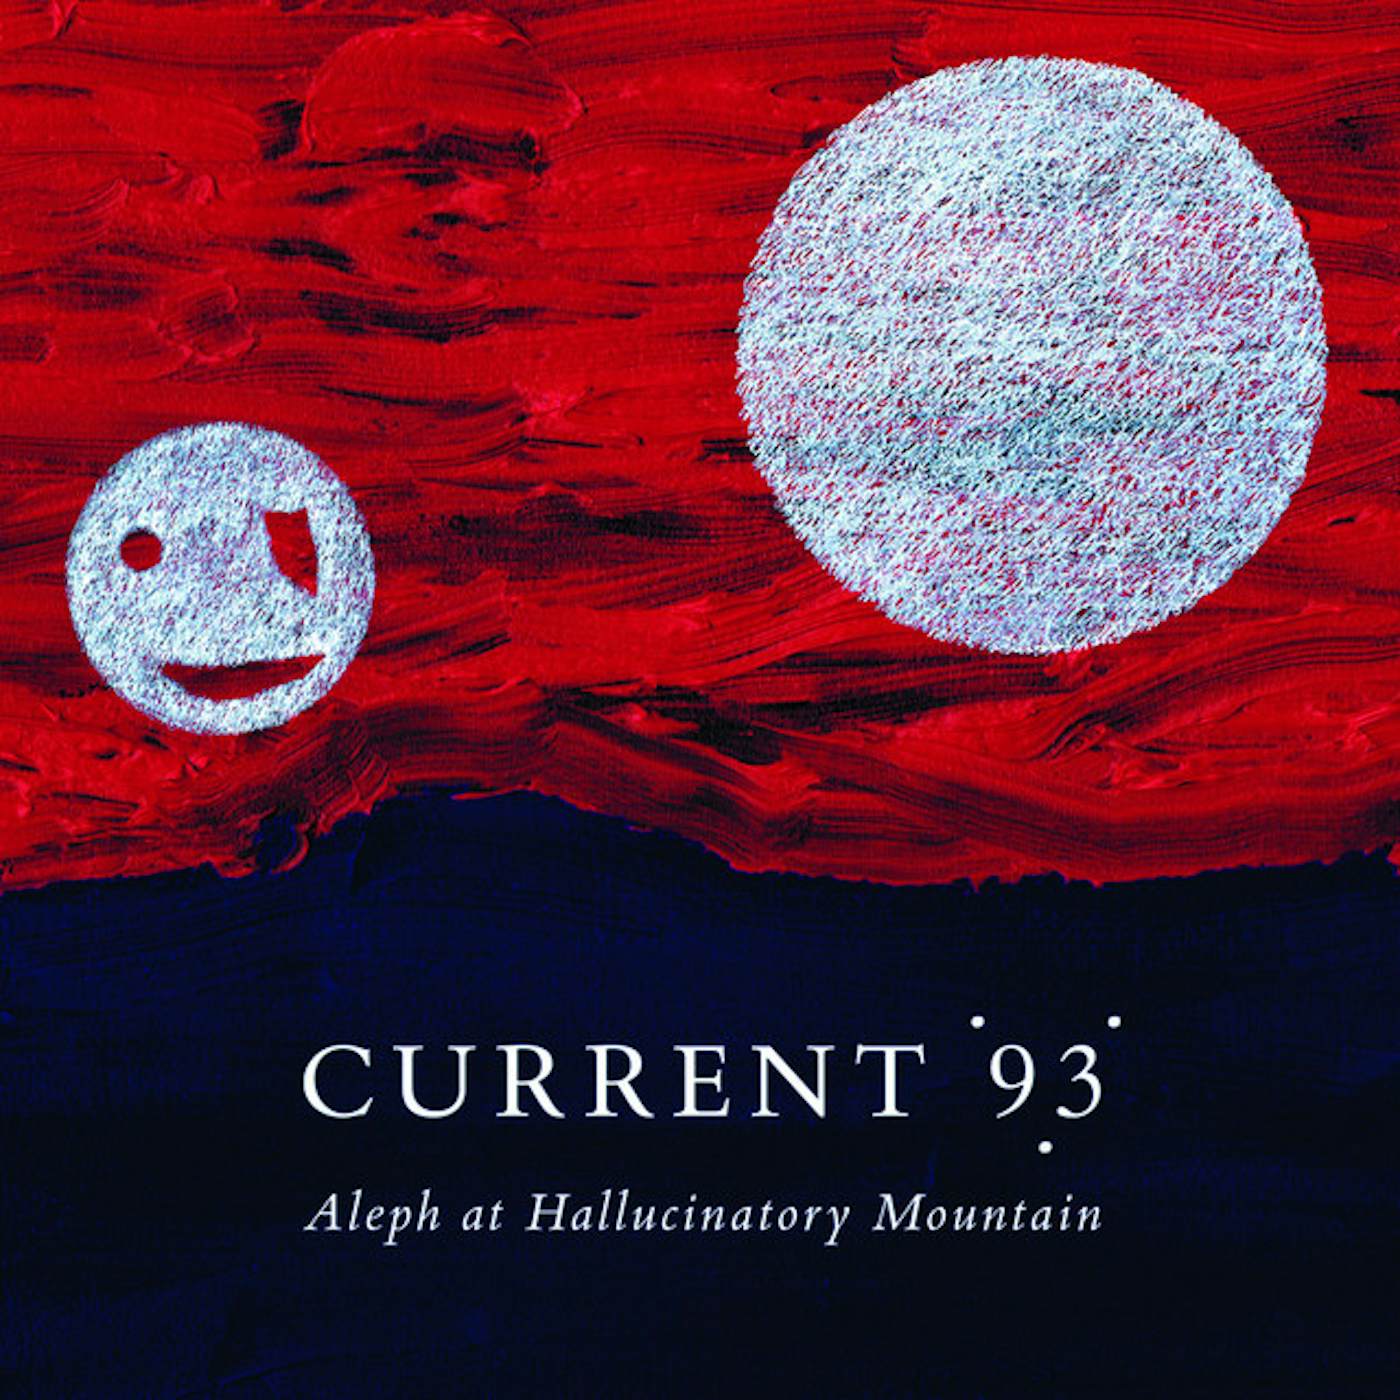 Current 93 Aleph At Hallucinatory Mountain Vinyl Record